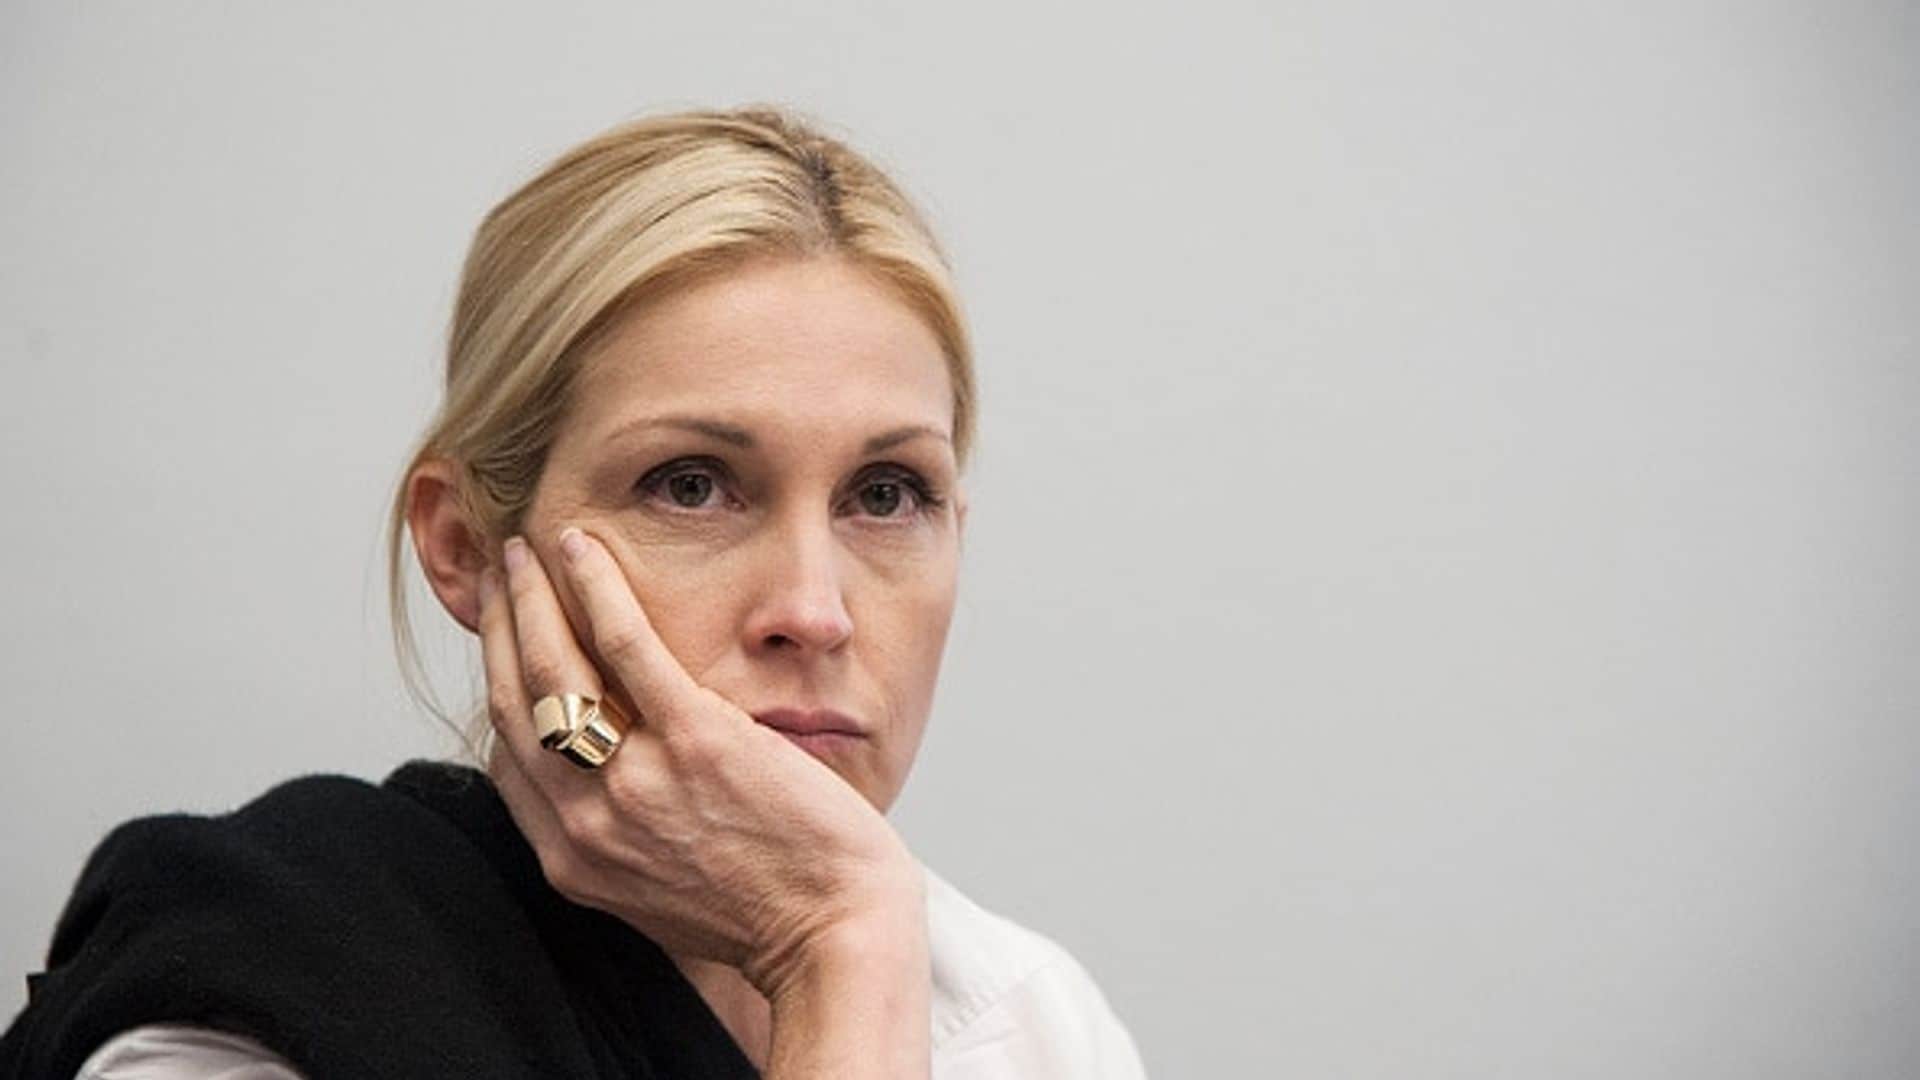 Kelly Rutherford loses ability to fight for custody of two kids in California